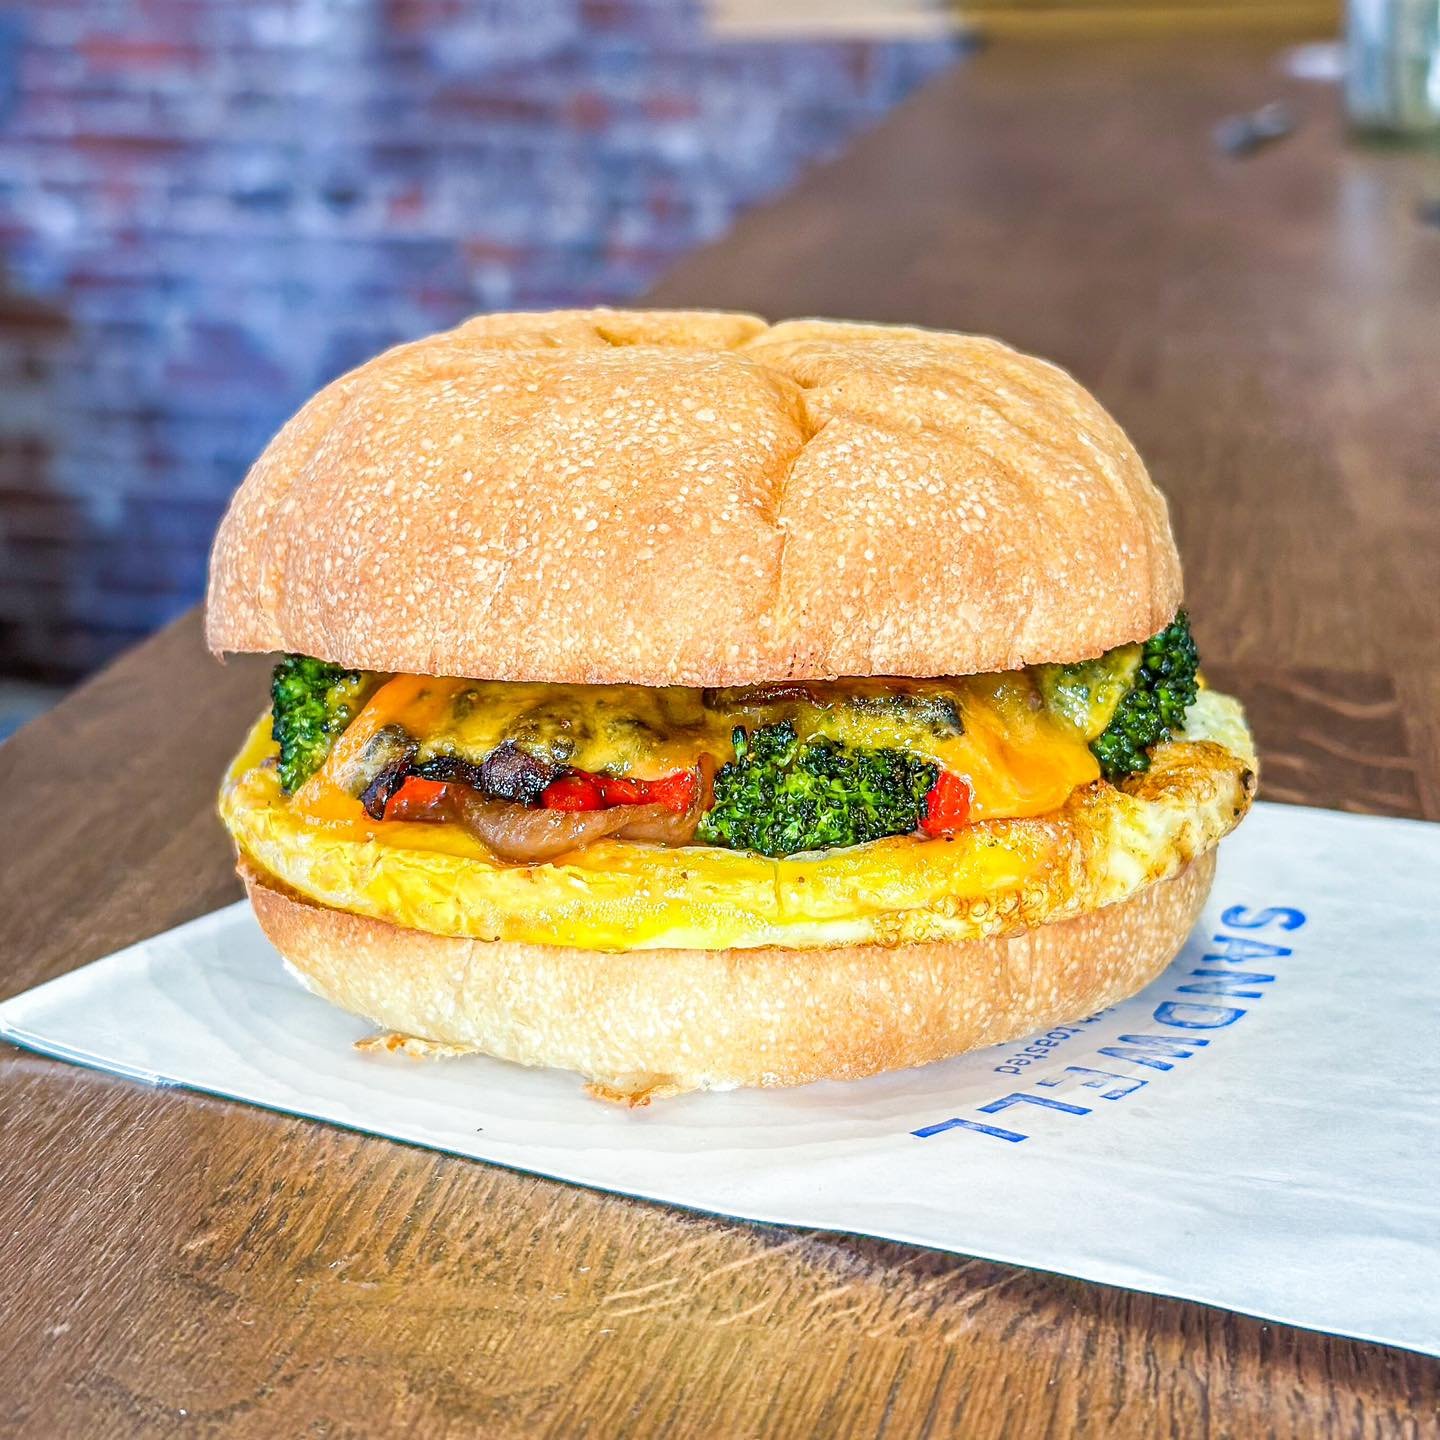 warm welcome to the menu for our breakfast veggie melt! a farmer&rsquo;s omelet on our fresh-baked kaiser rolls, packed with 🥦, spinach, roasted red 🫑, and caramelized 🧅 &amp; topped with cheddar 🧀 

stop by and say hi to the delicious veggie mel